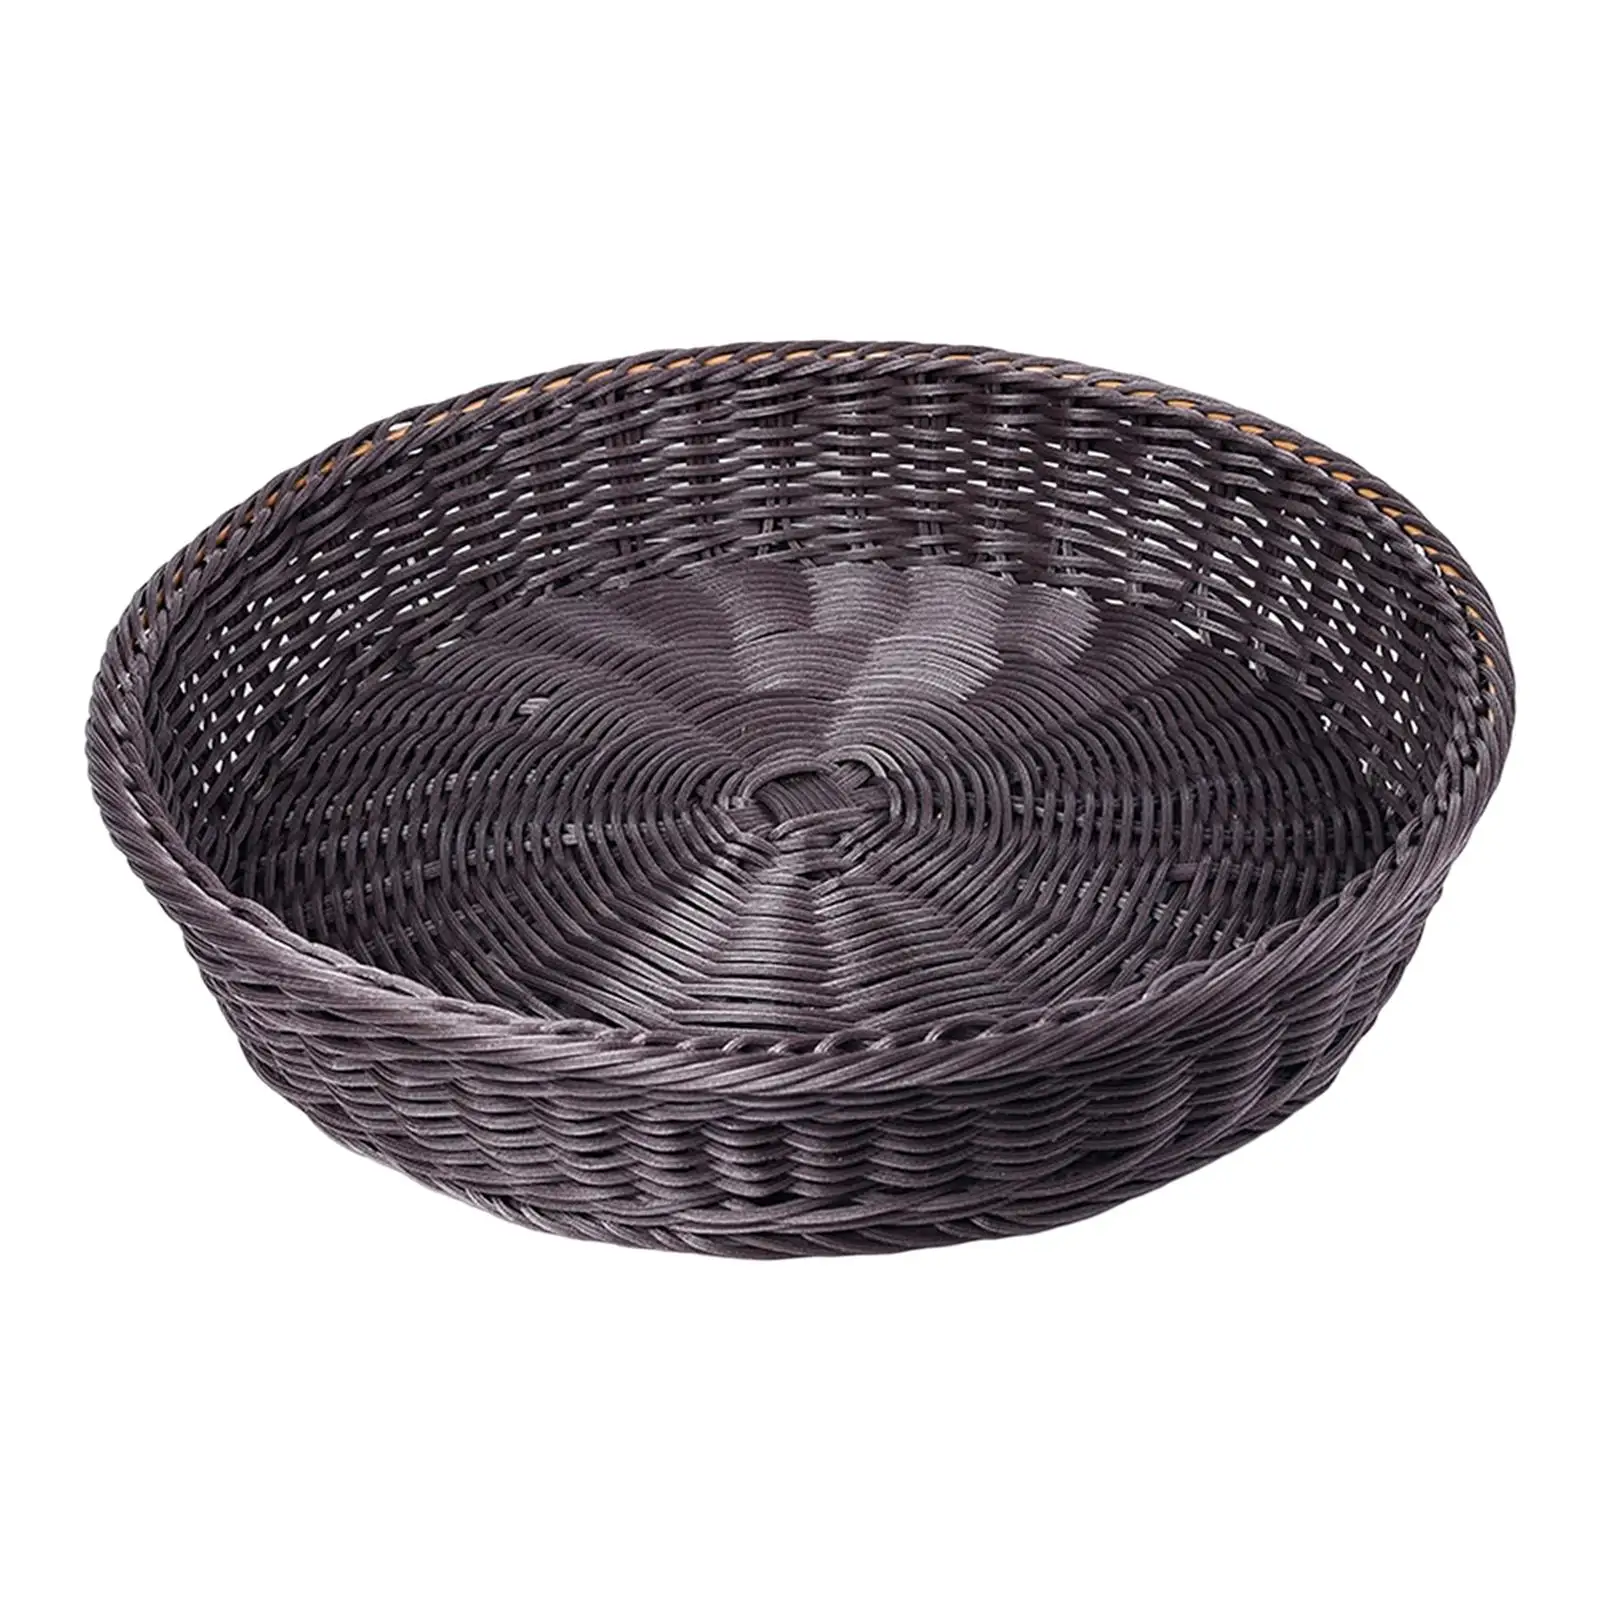 Kitchen Bread Box Handmade Woven Fruit Basket Rattan Bread Basket for Snacks Fruits Home Vegetables Dining Coffee Table